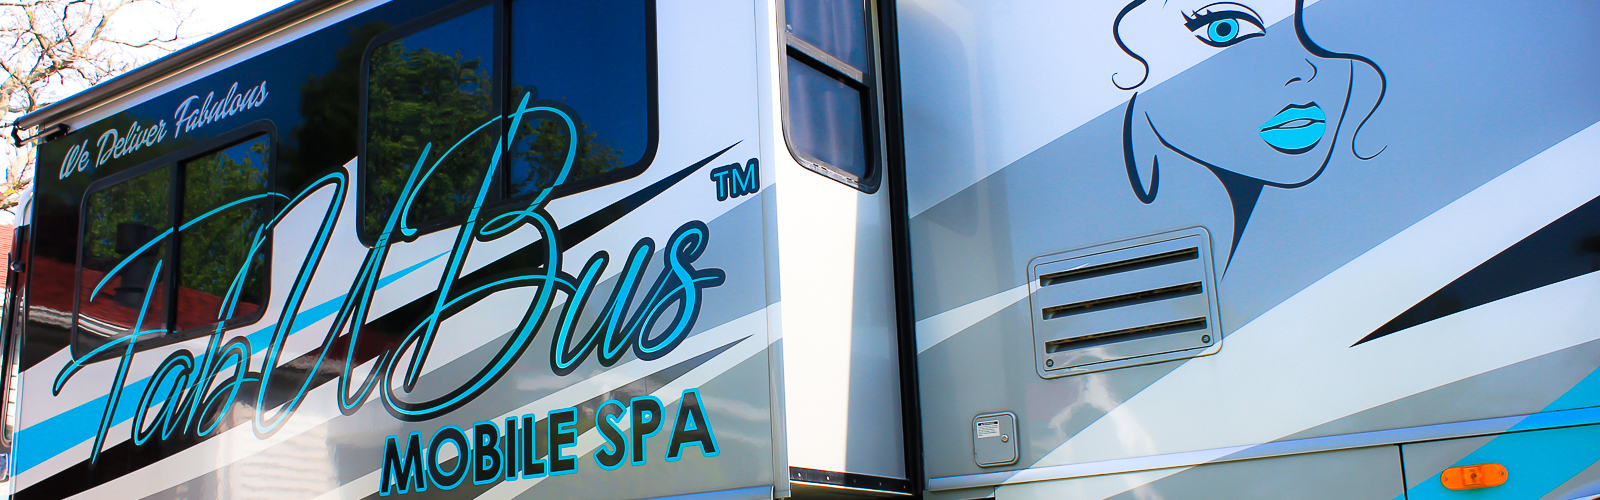 The FabUBus is a mobile spa, offering an array of services including manicures, pedicures, makeup, blowouts, and waxing.